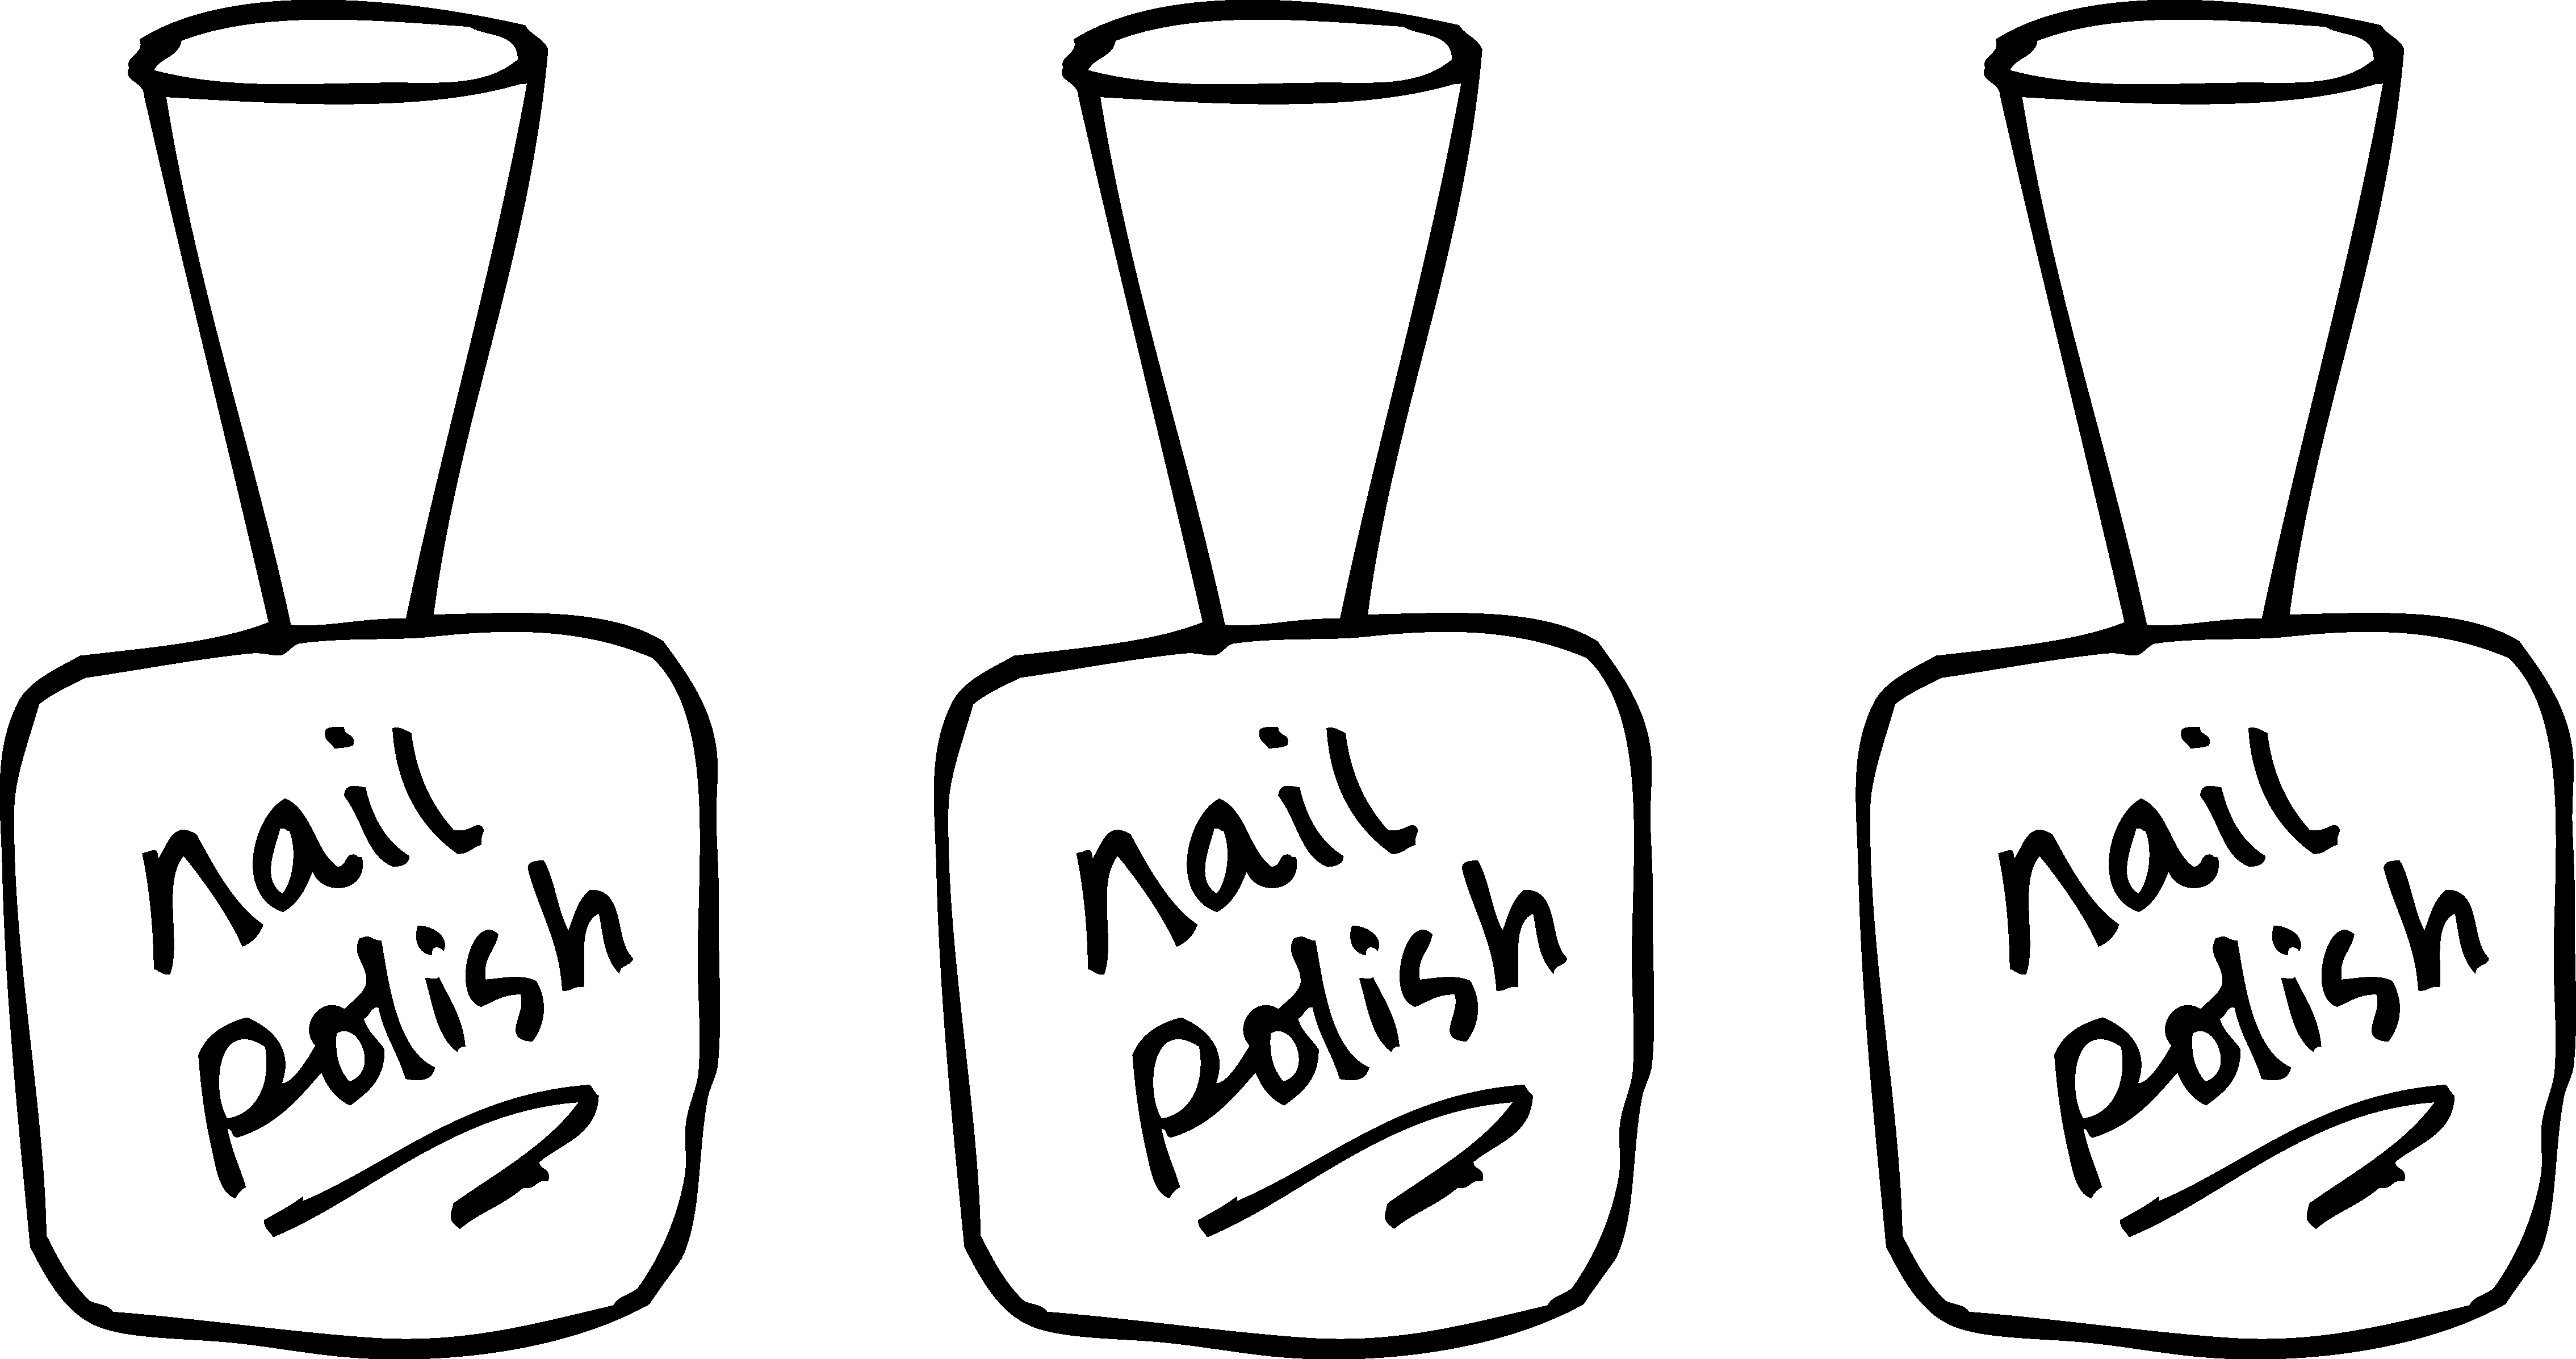 Win clipart black and white. Nail polish coloring page